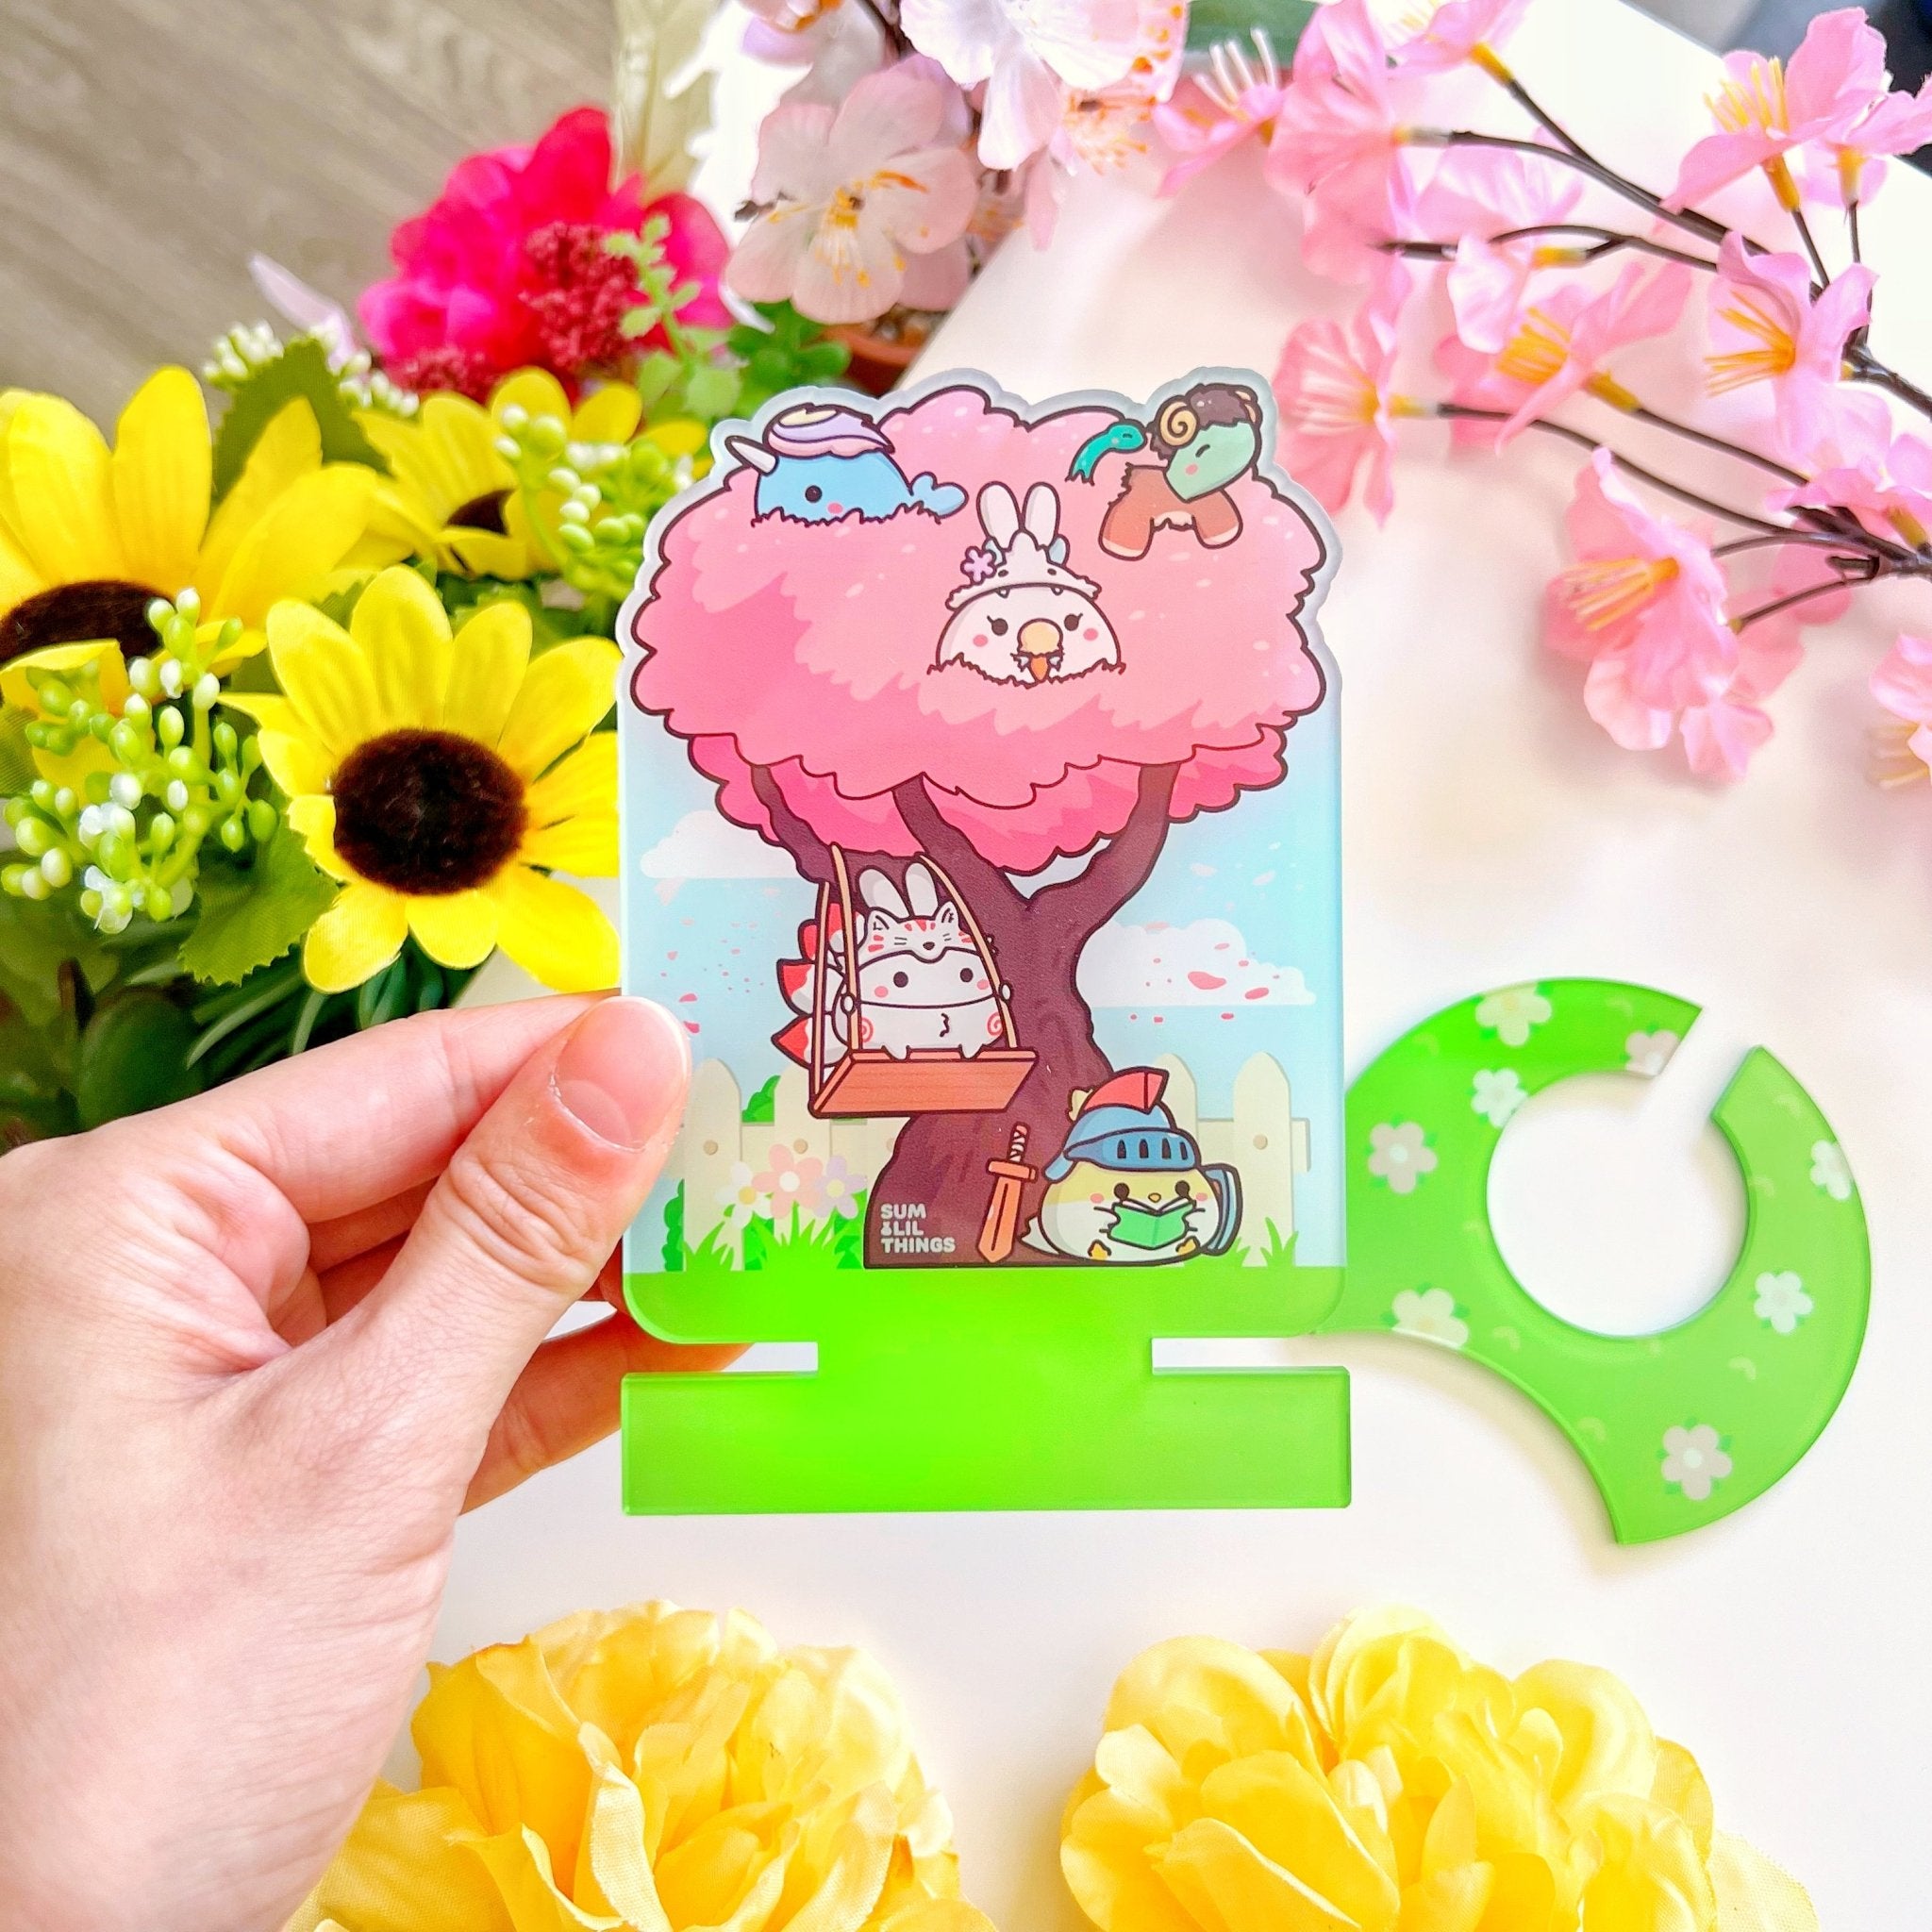 Phone Standee - Lil' Mythical Creatures - SumLilThings